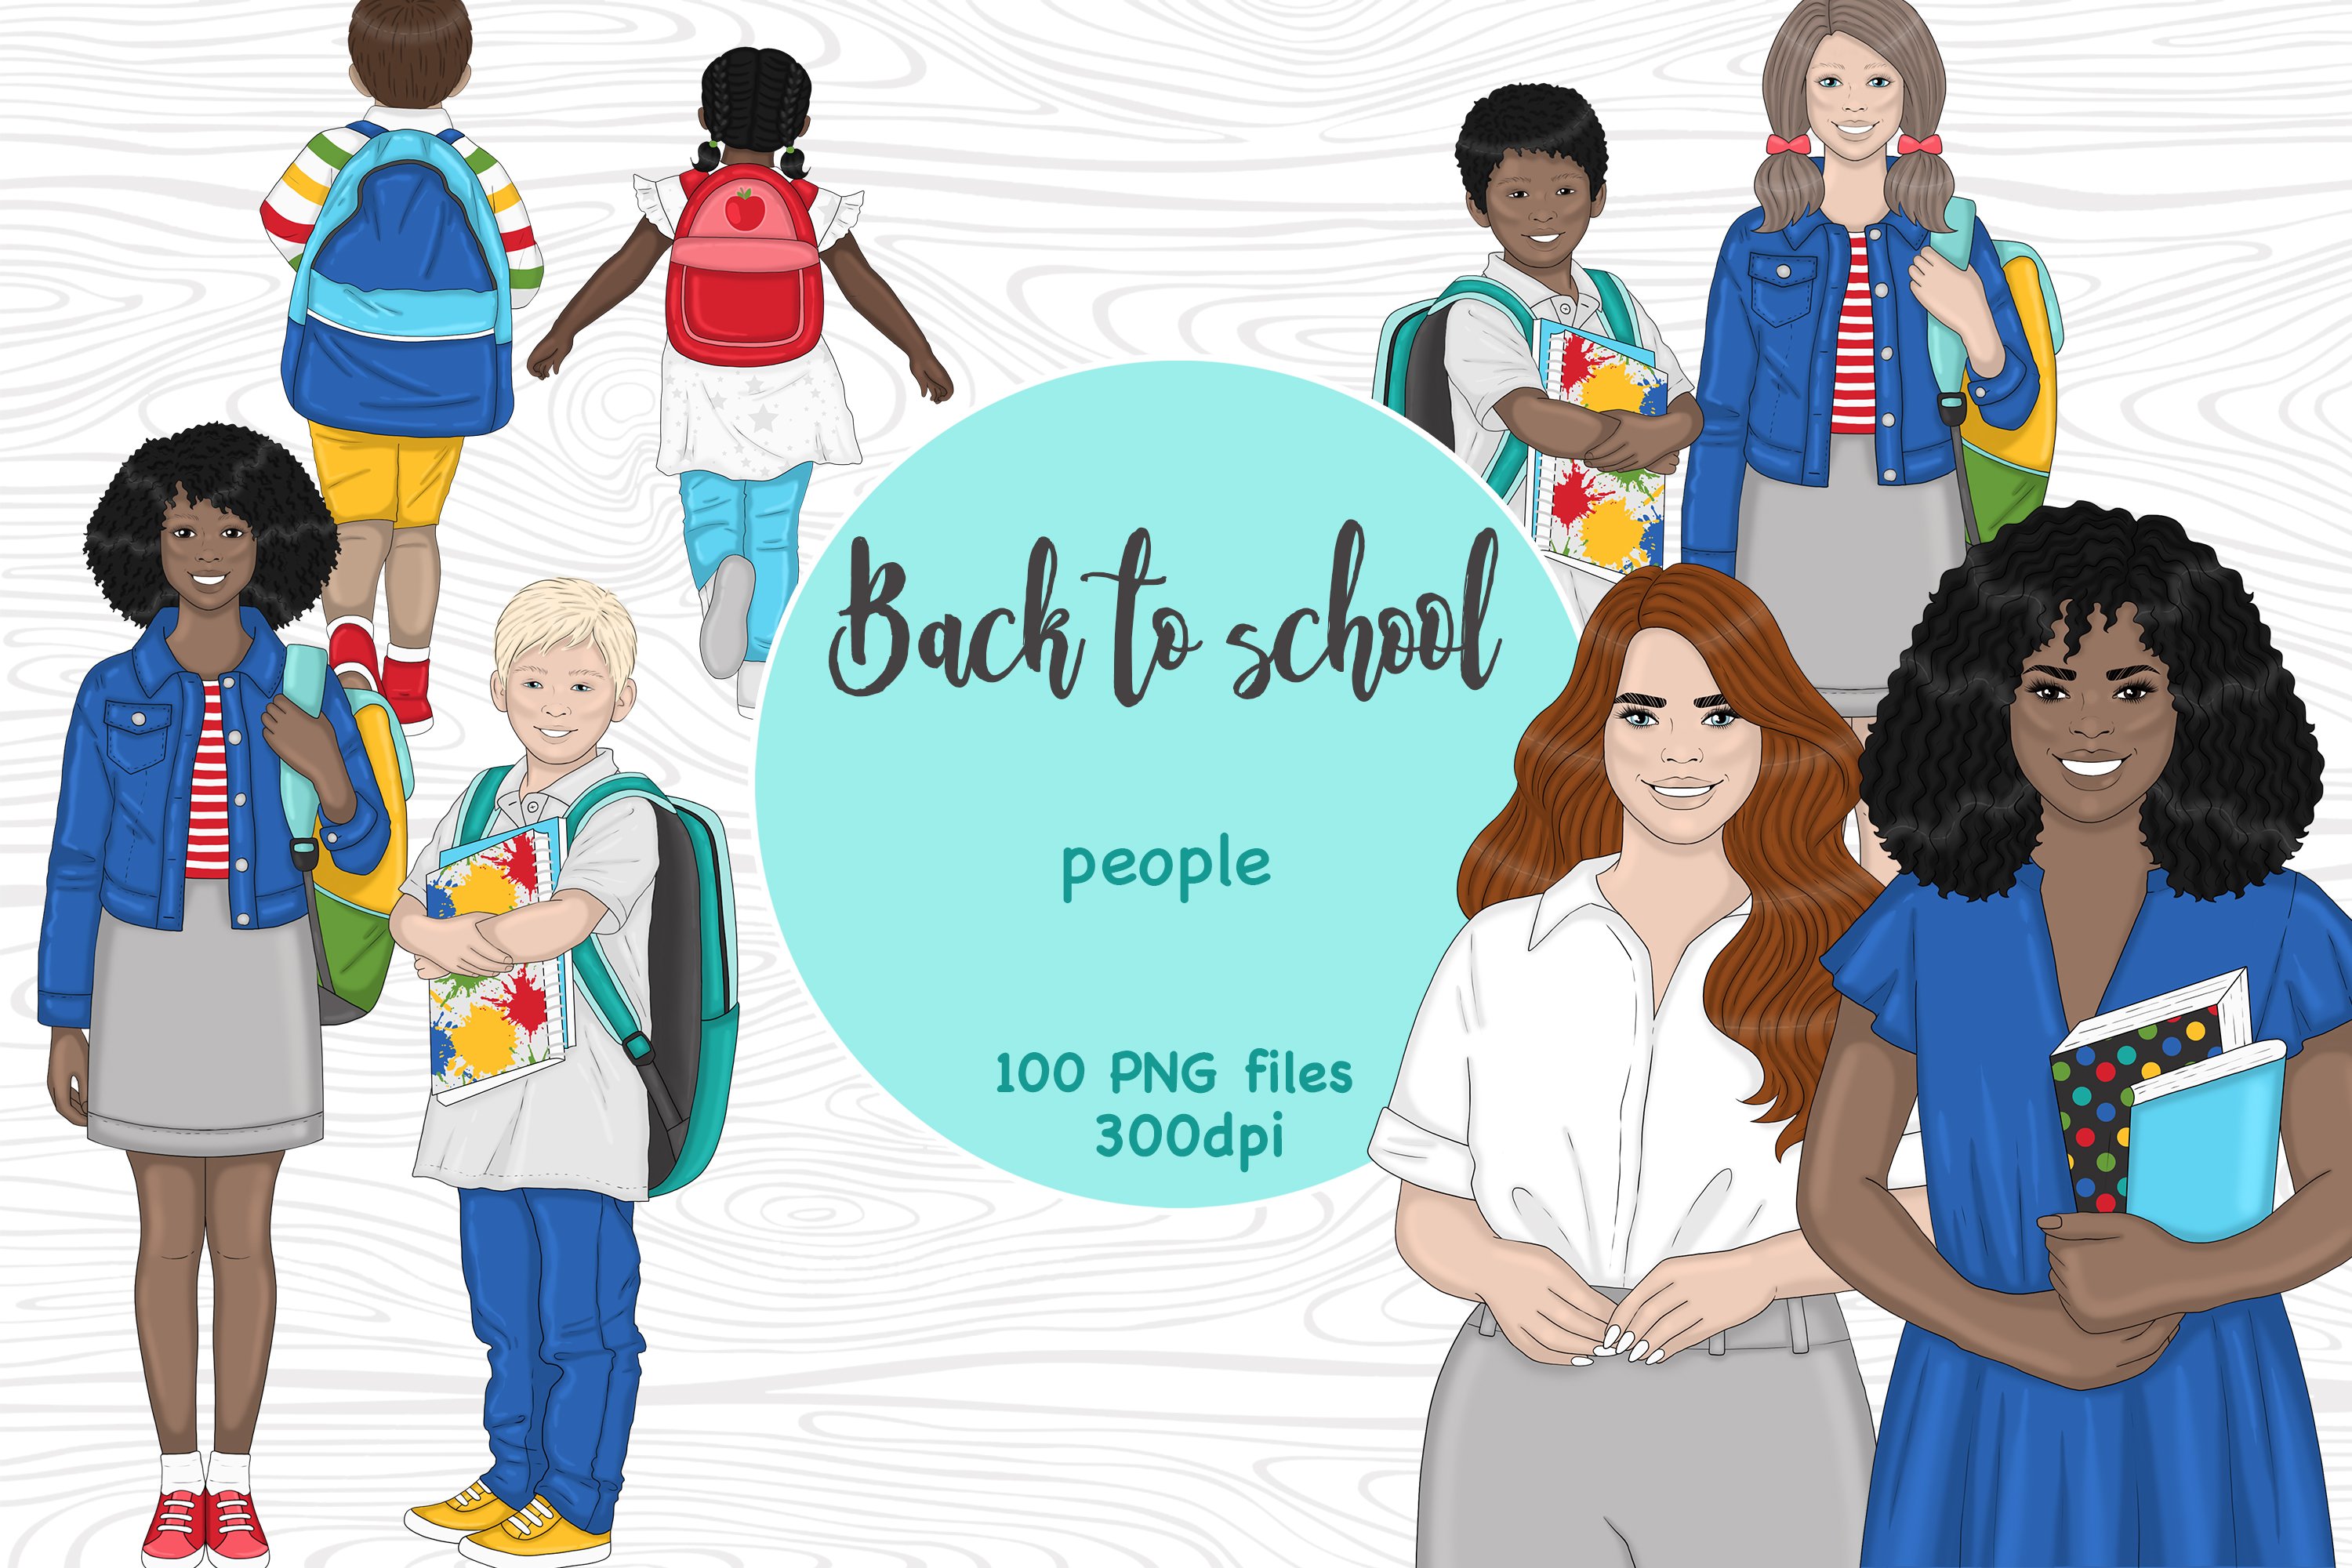 Back To School People Clipart cover image.